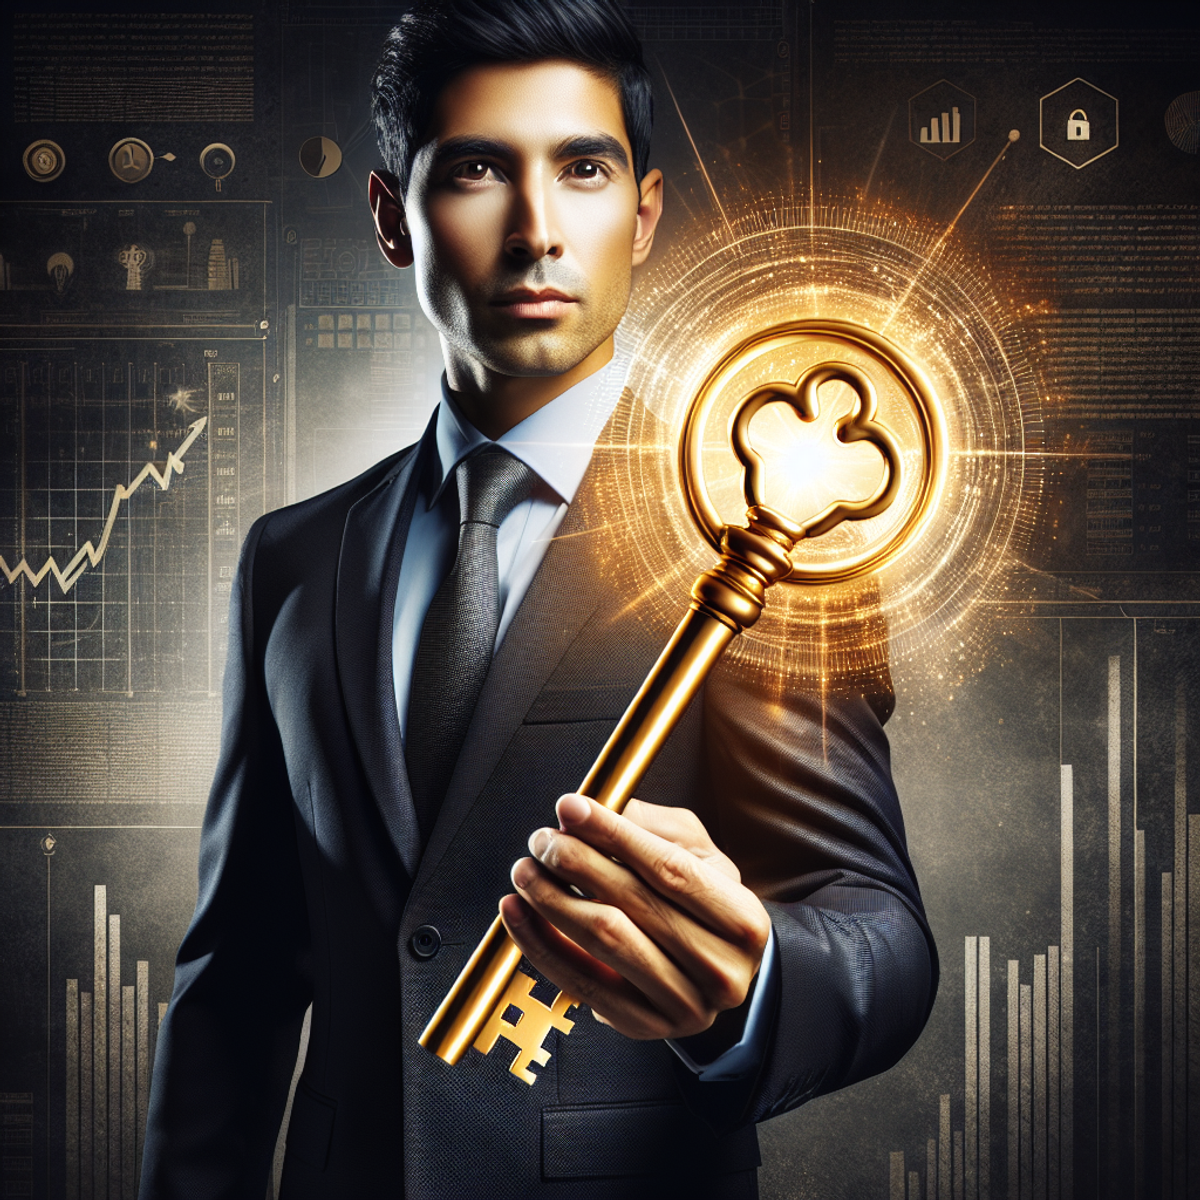 A South Asian businessman in a well-tailored suit and tie, holding a large golden key, exuding confidence and determination.